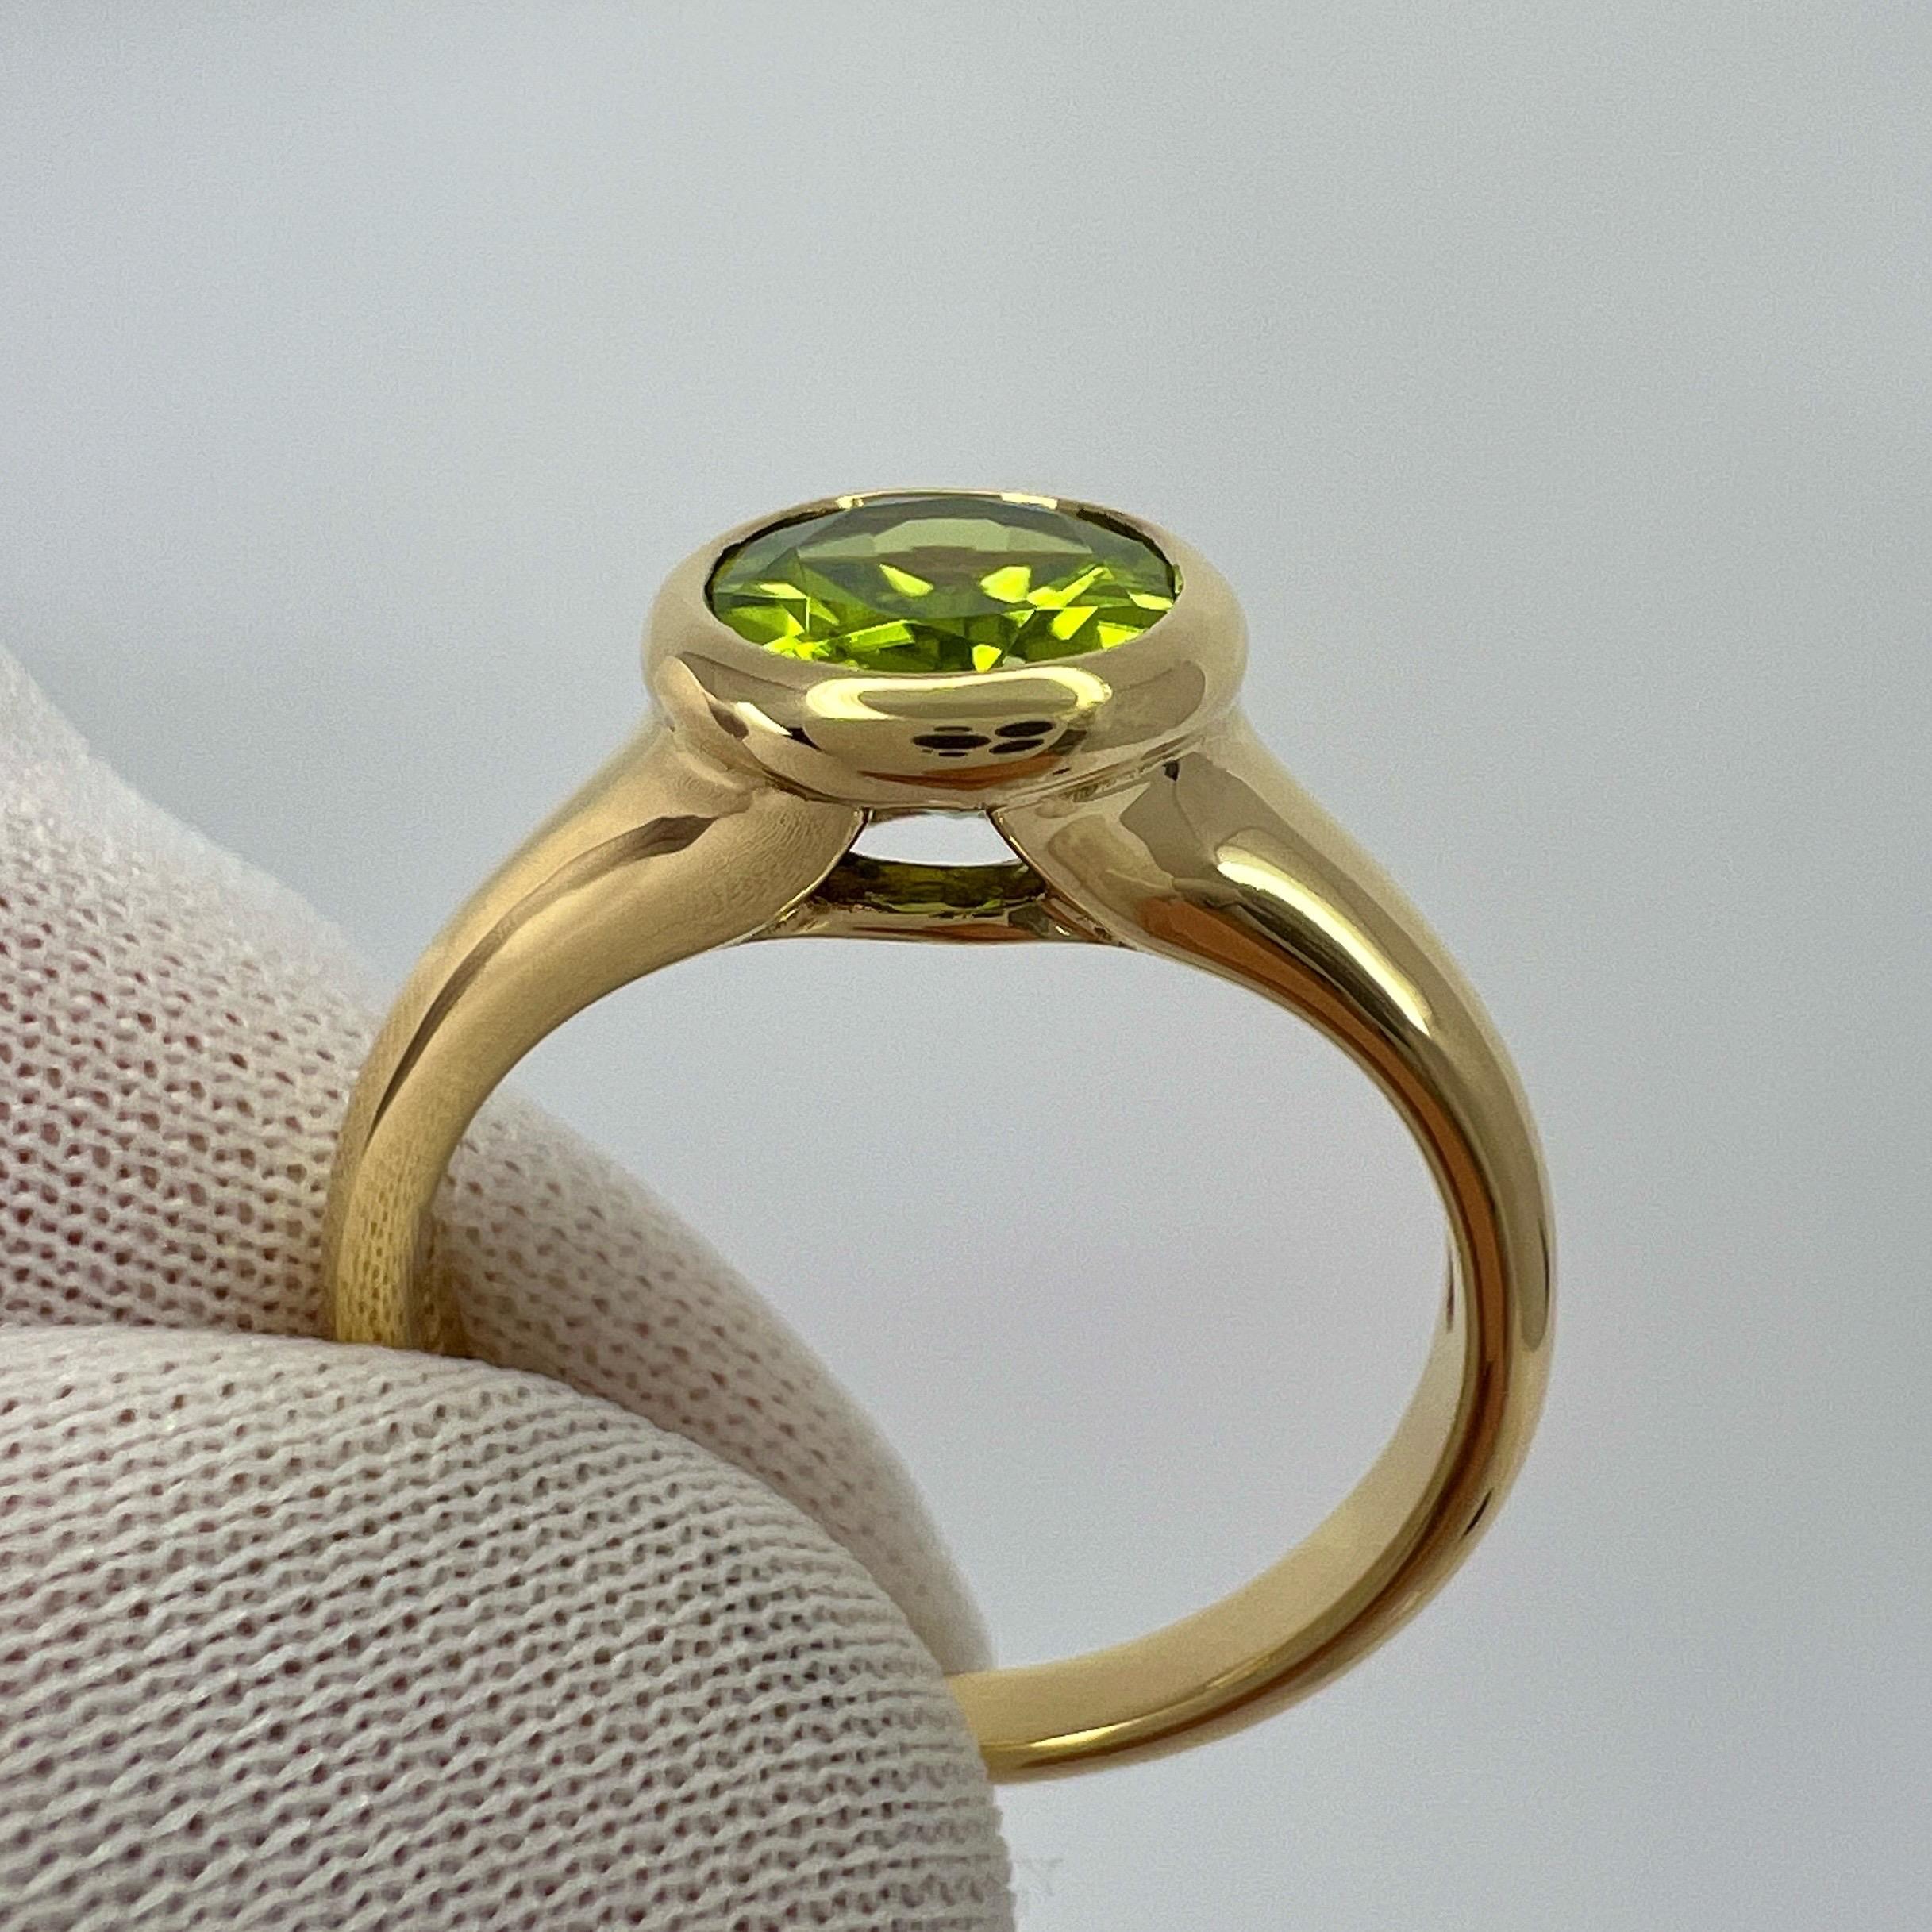 Rare Bvlgari Green Peridot Oval 18k Yellow Gold Signet Style Bezel Rubover Ring For Sale 2